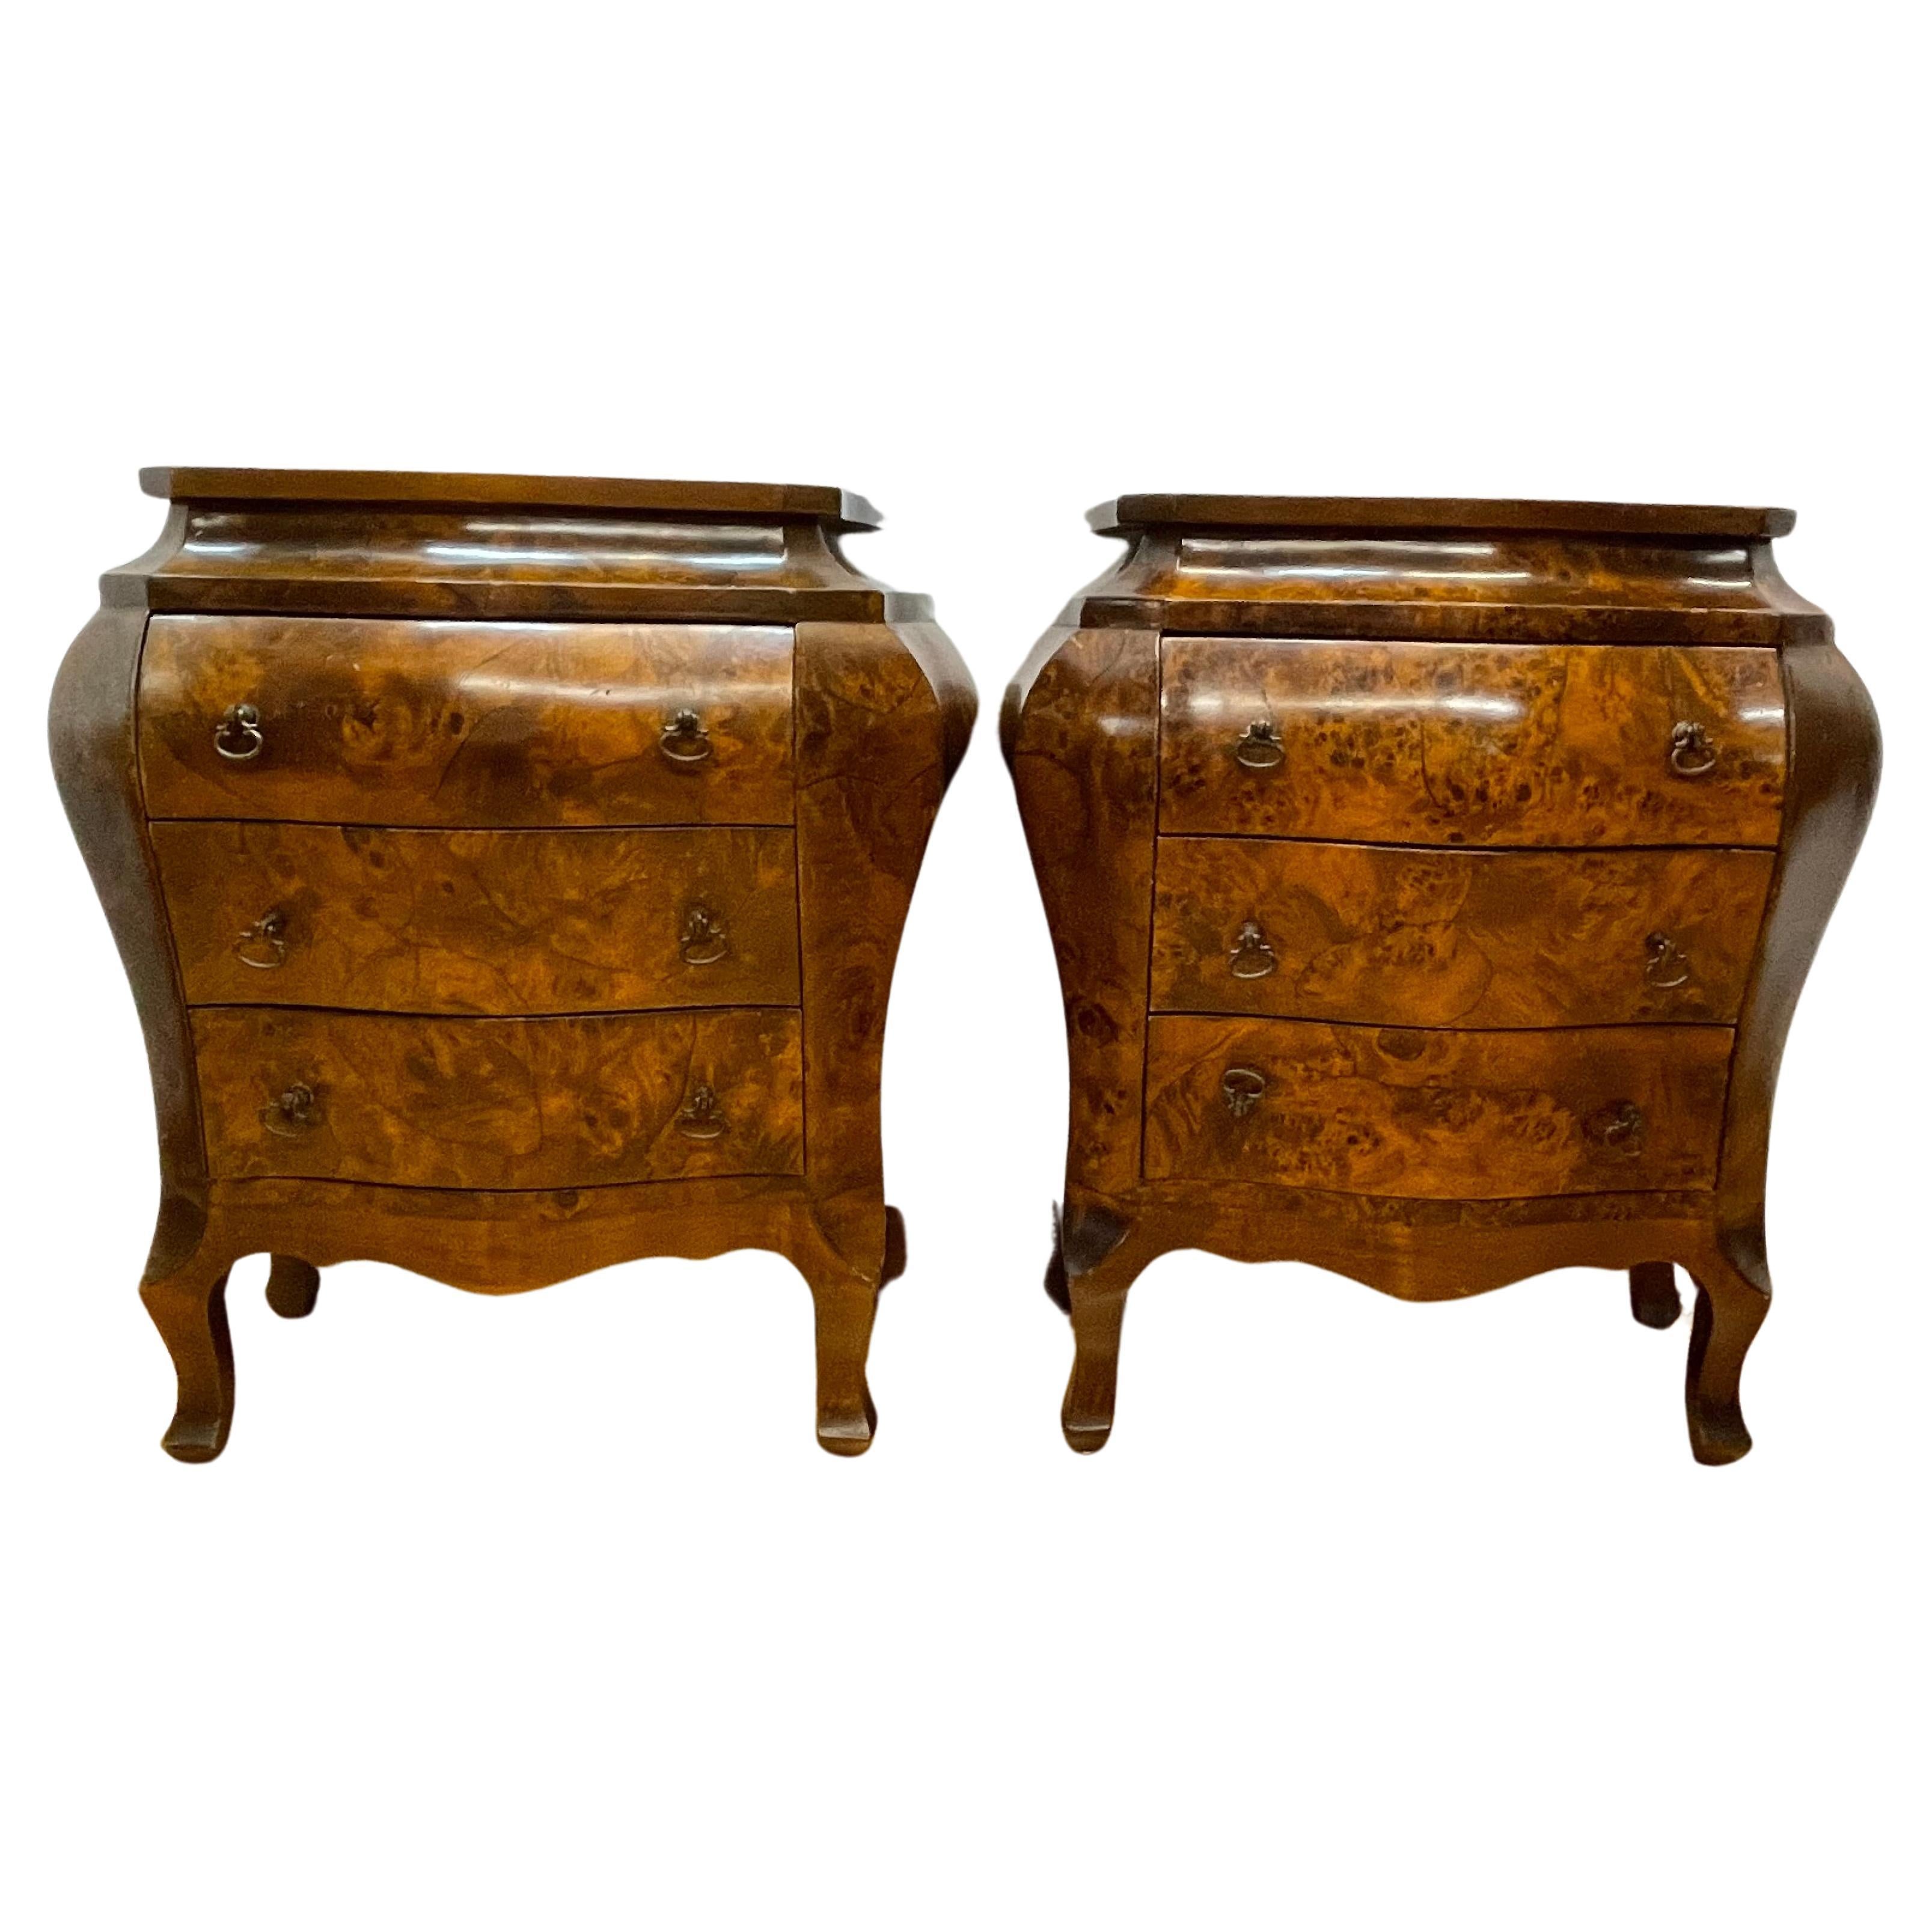 Pair of three draw bombe commodes marked Italy with a maple burled veneer